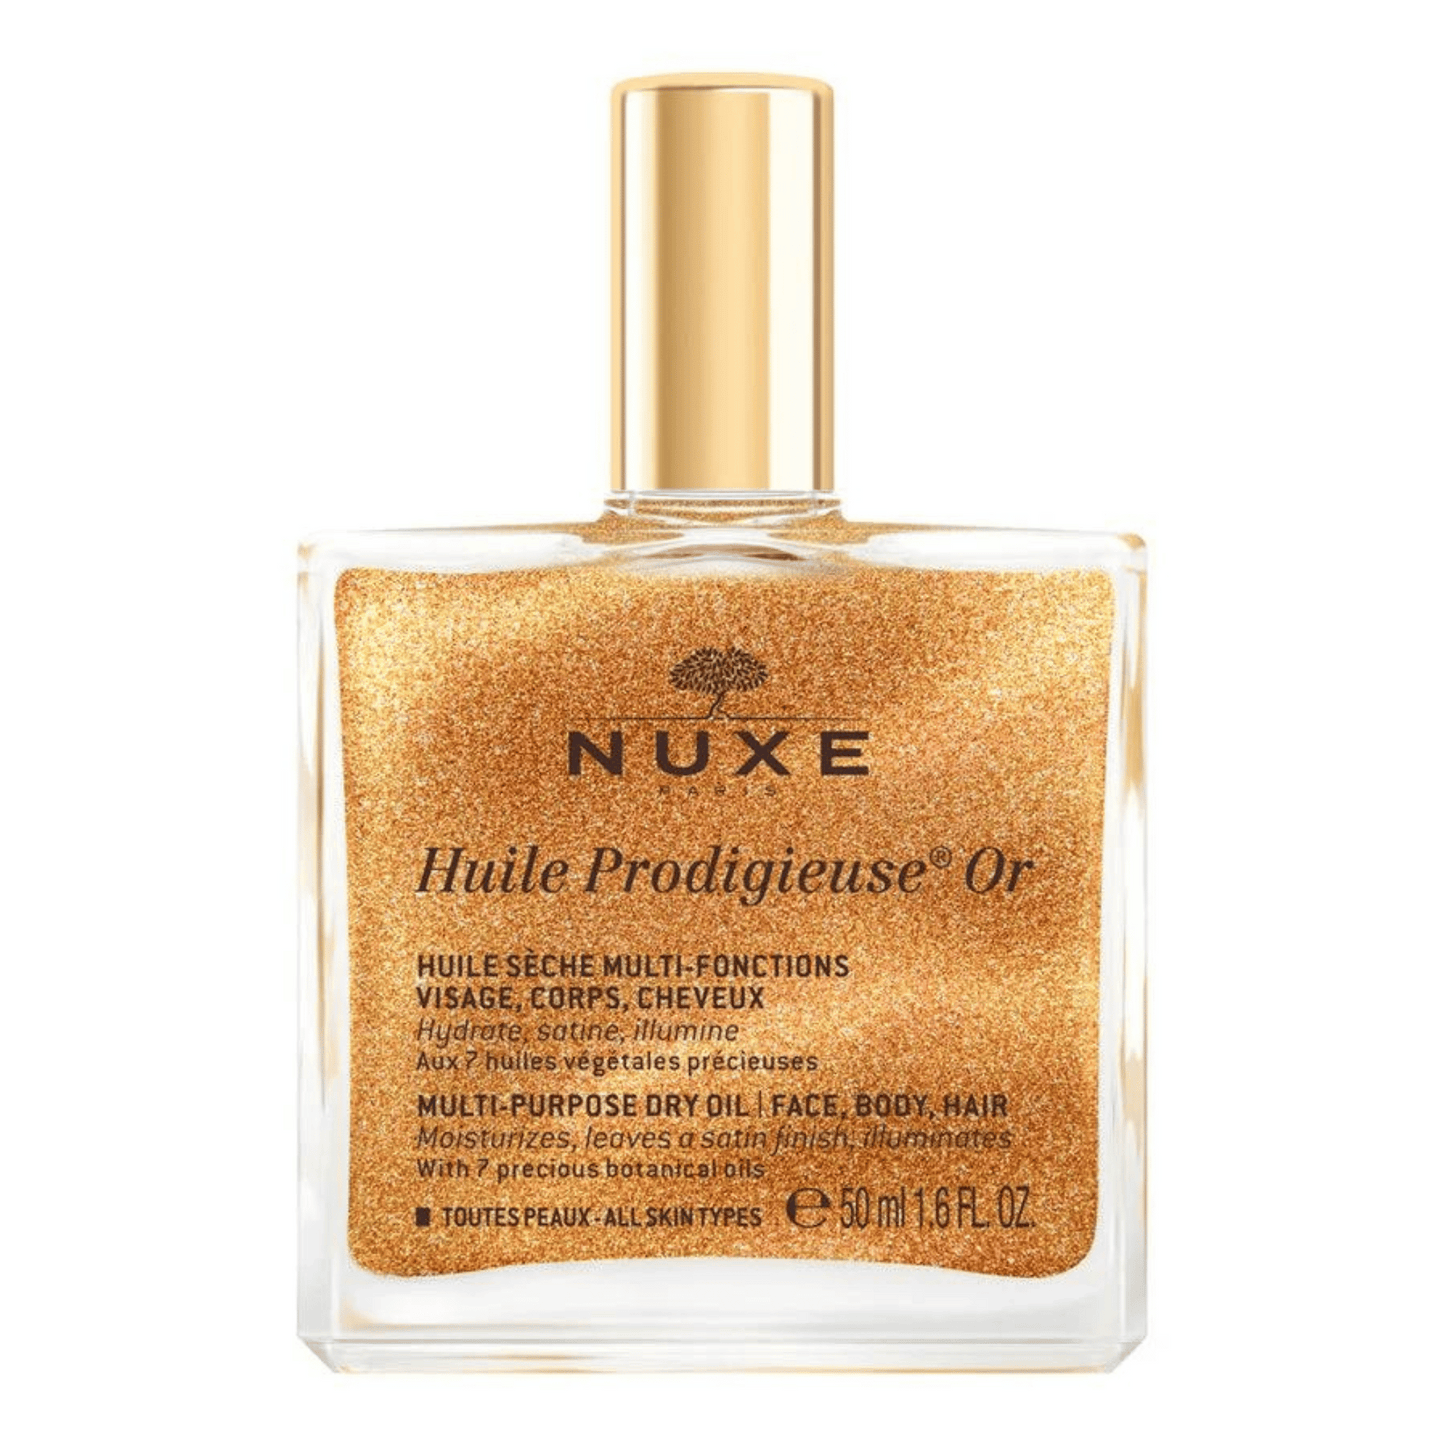 Primary Image of Huile Prodigieuse Shimmering Dry Oil